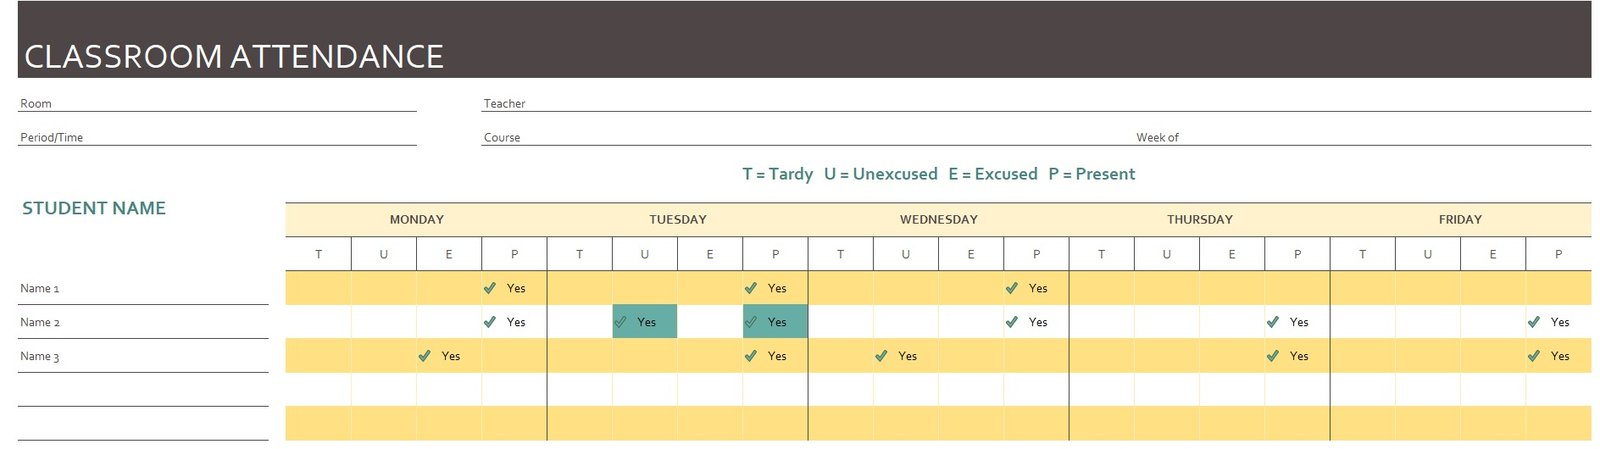 Weekly Class Attendance Record Template In Excel